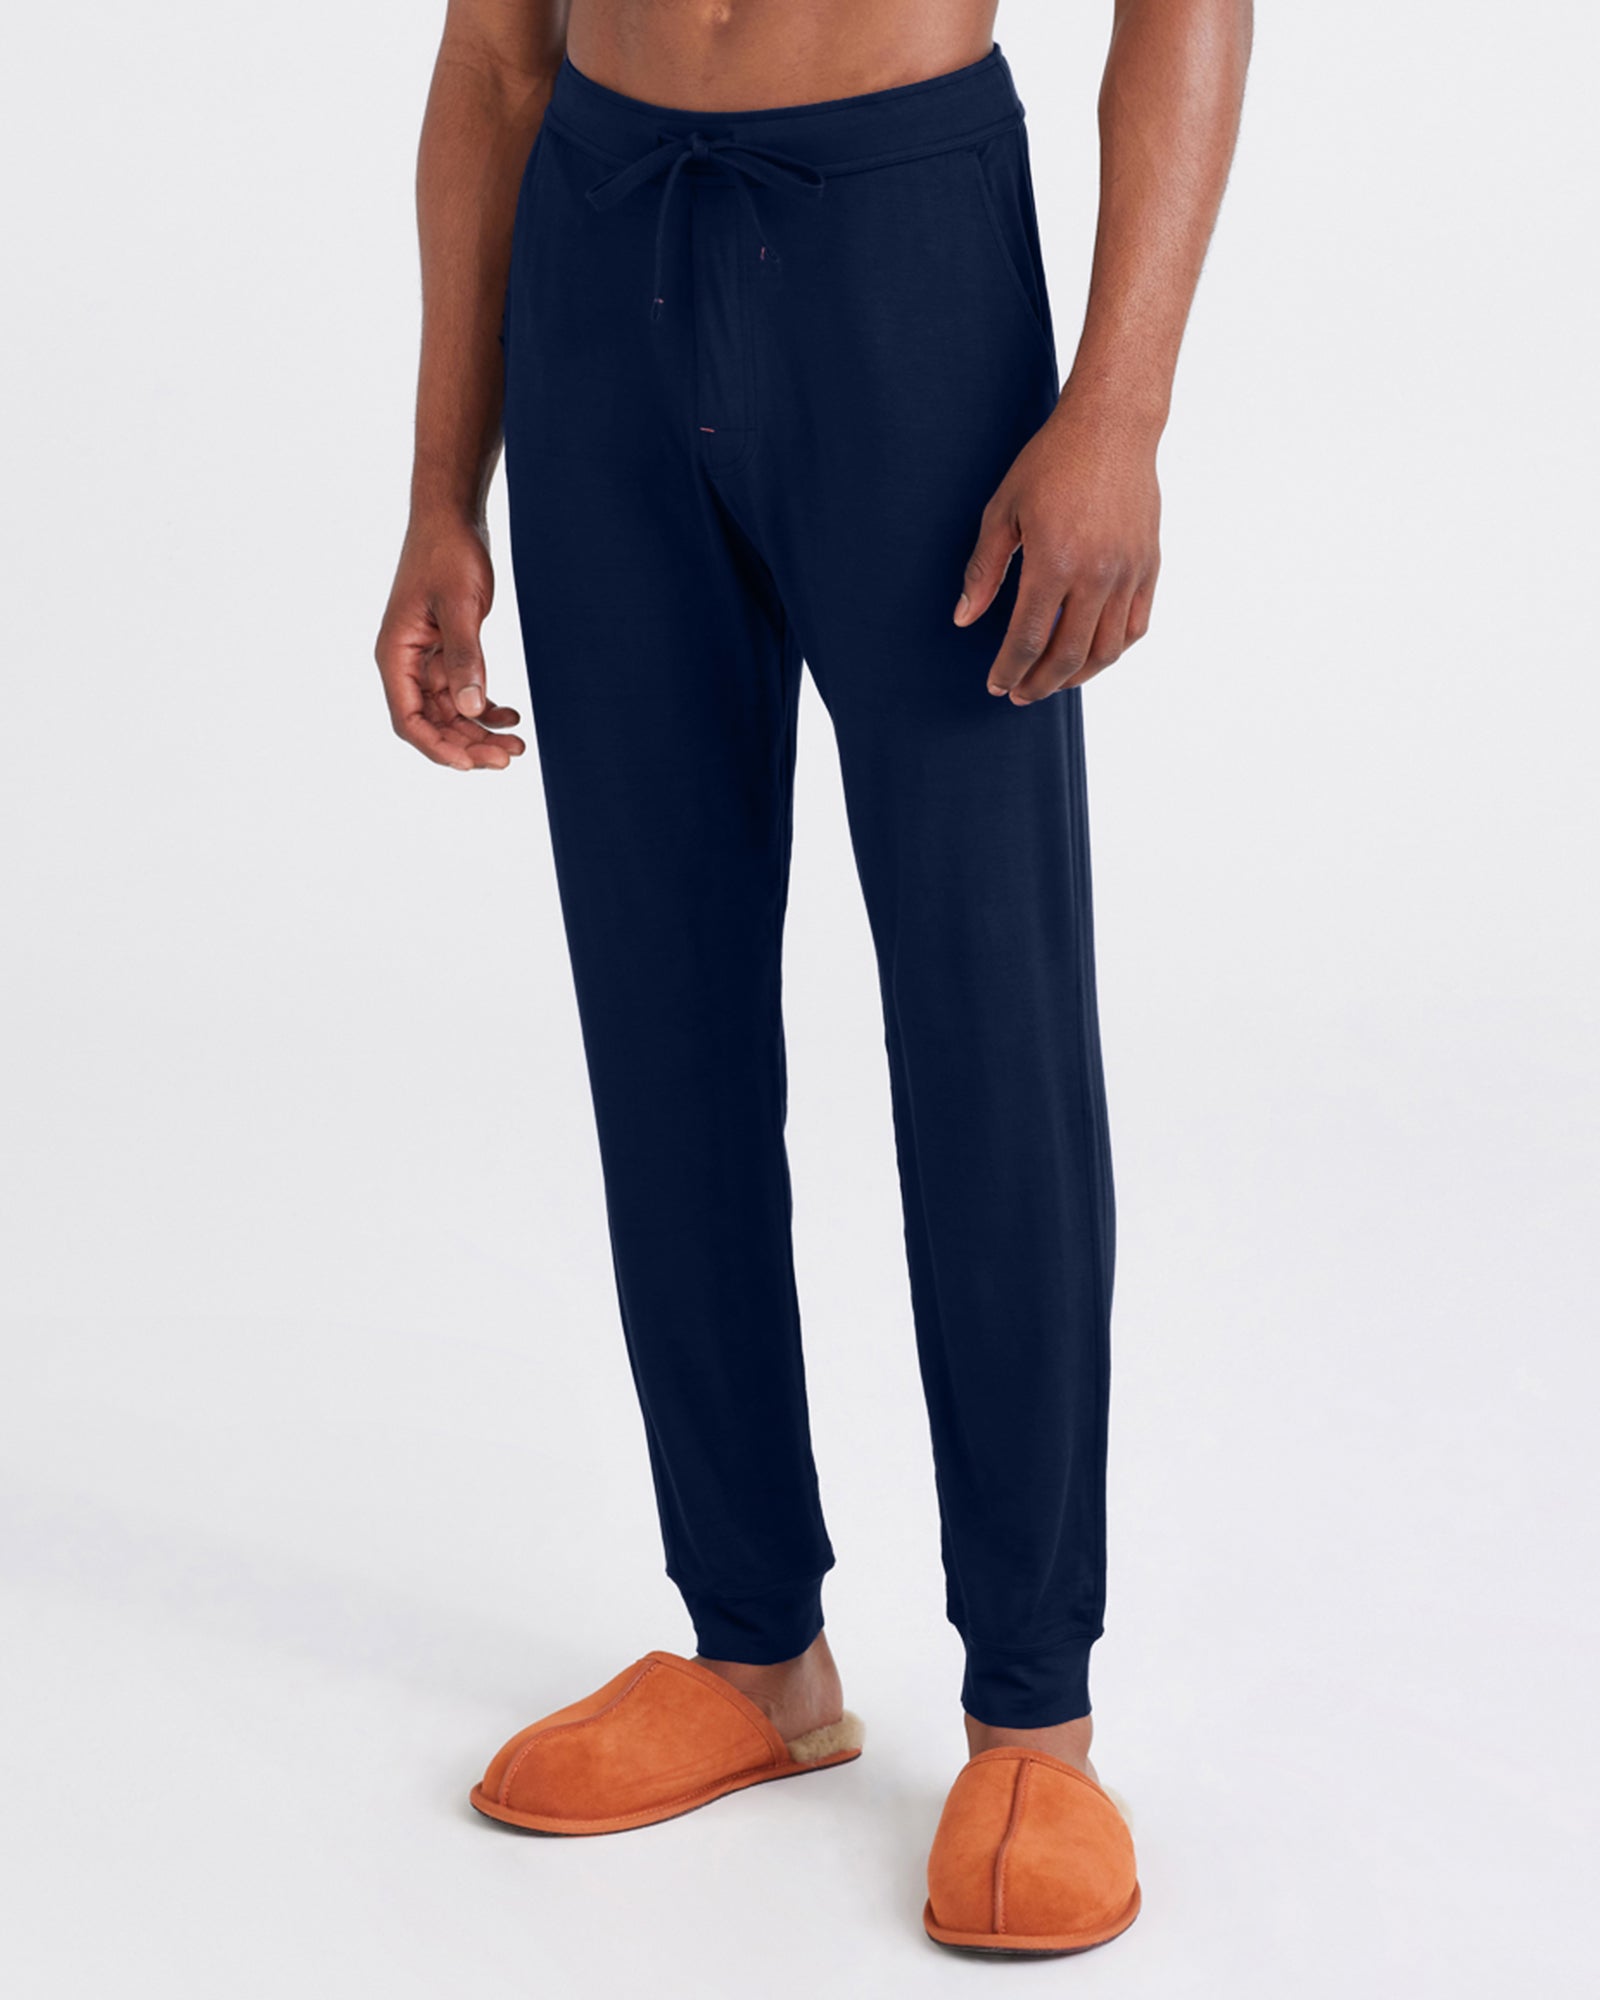 Front - Model wearing  Snooze Sleep Pant in Maritime